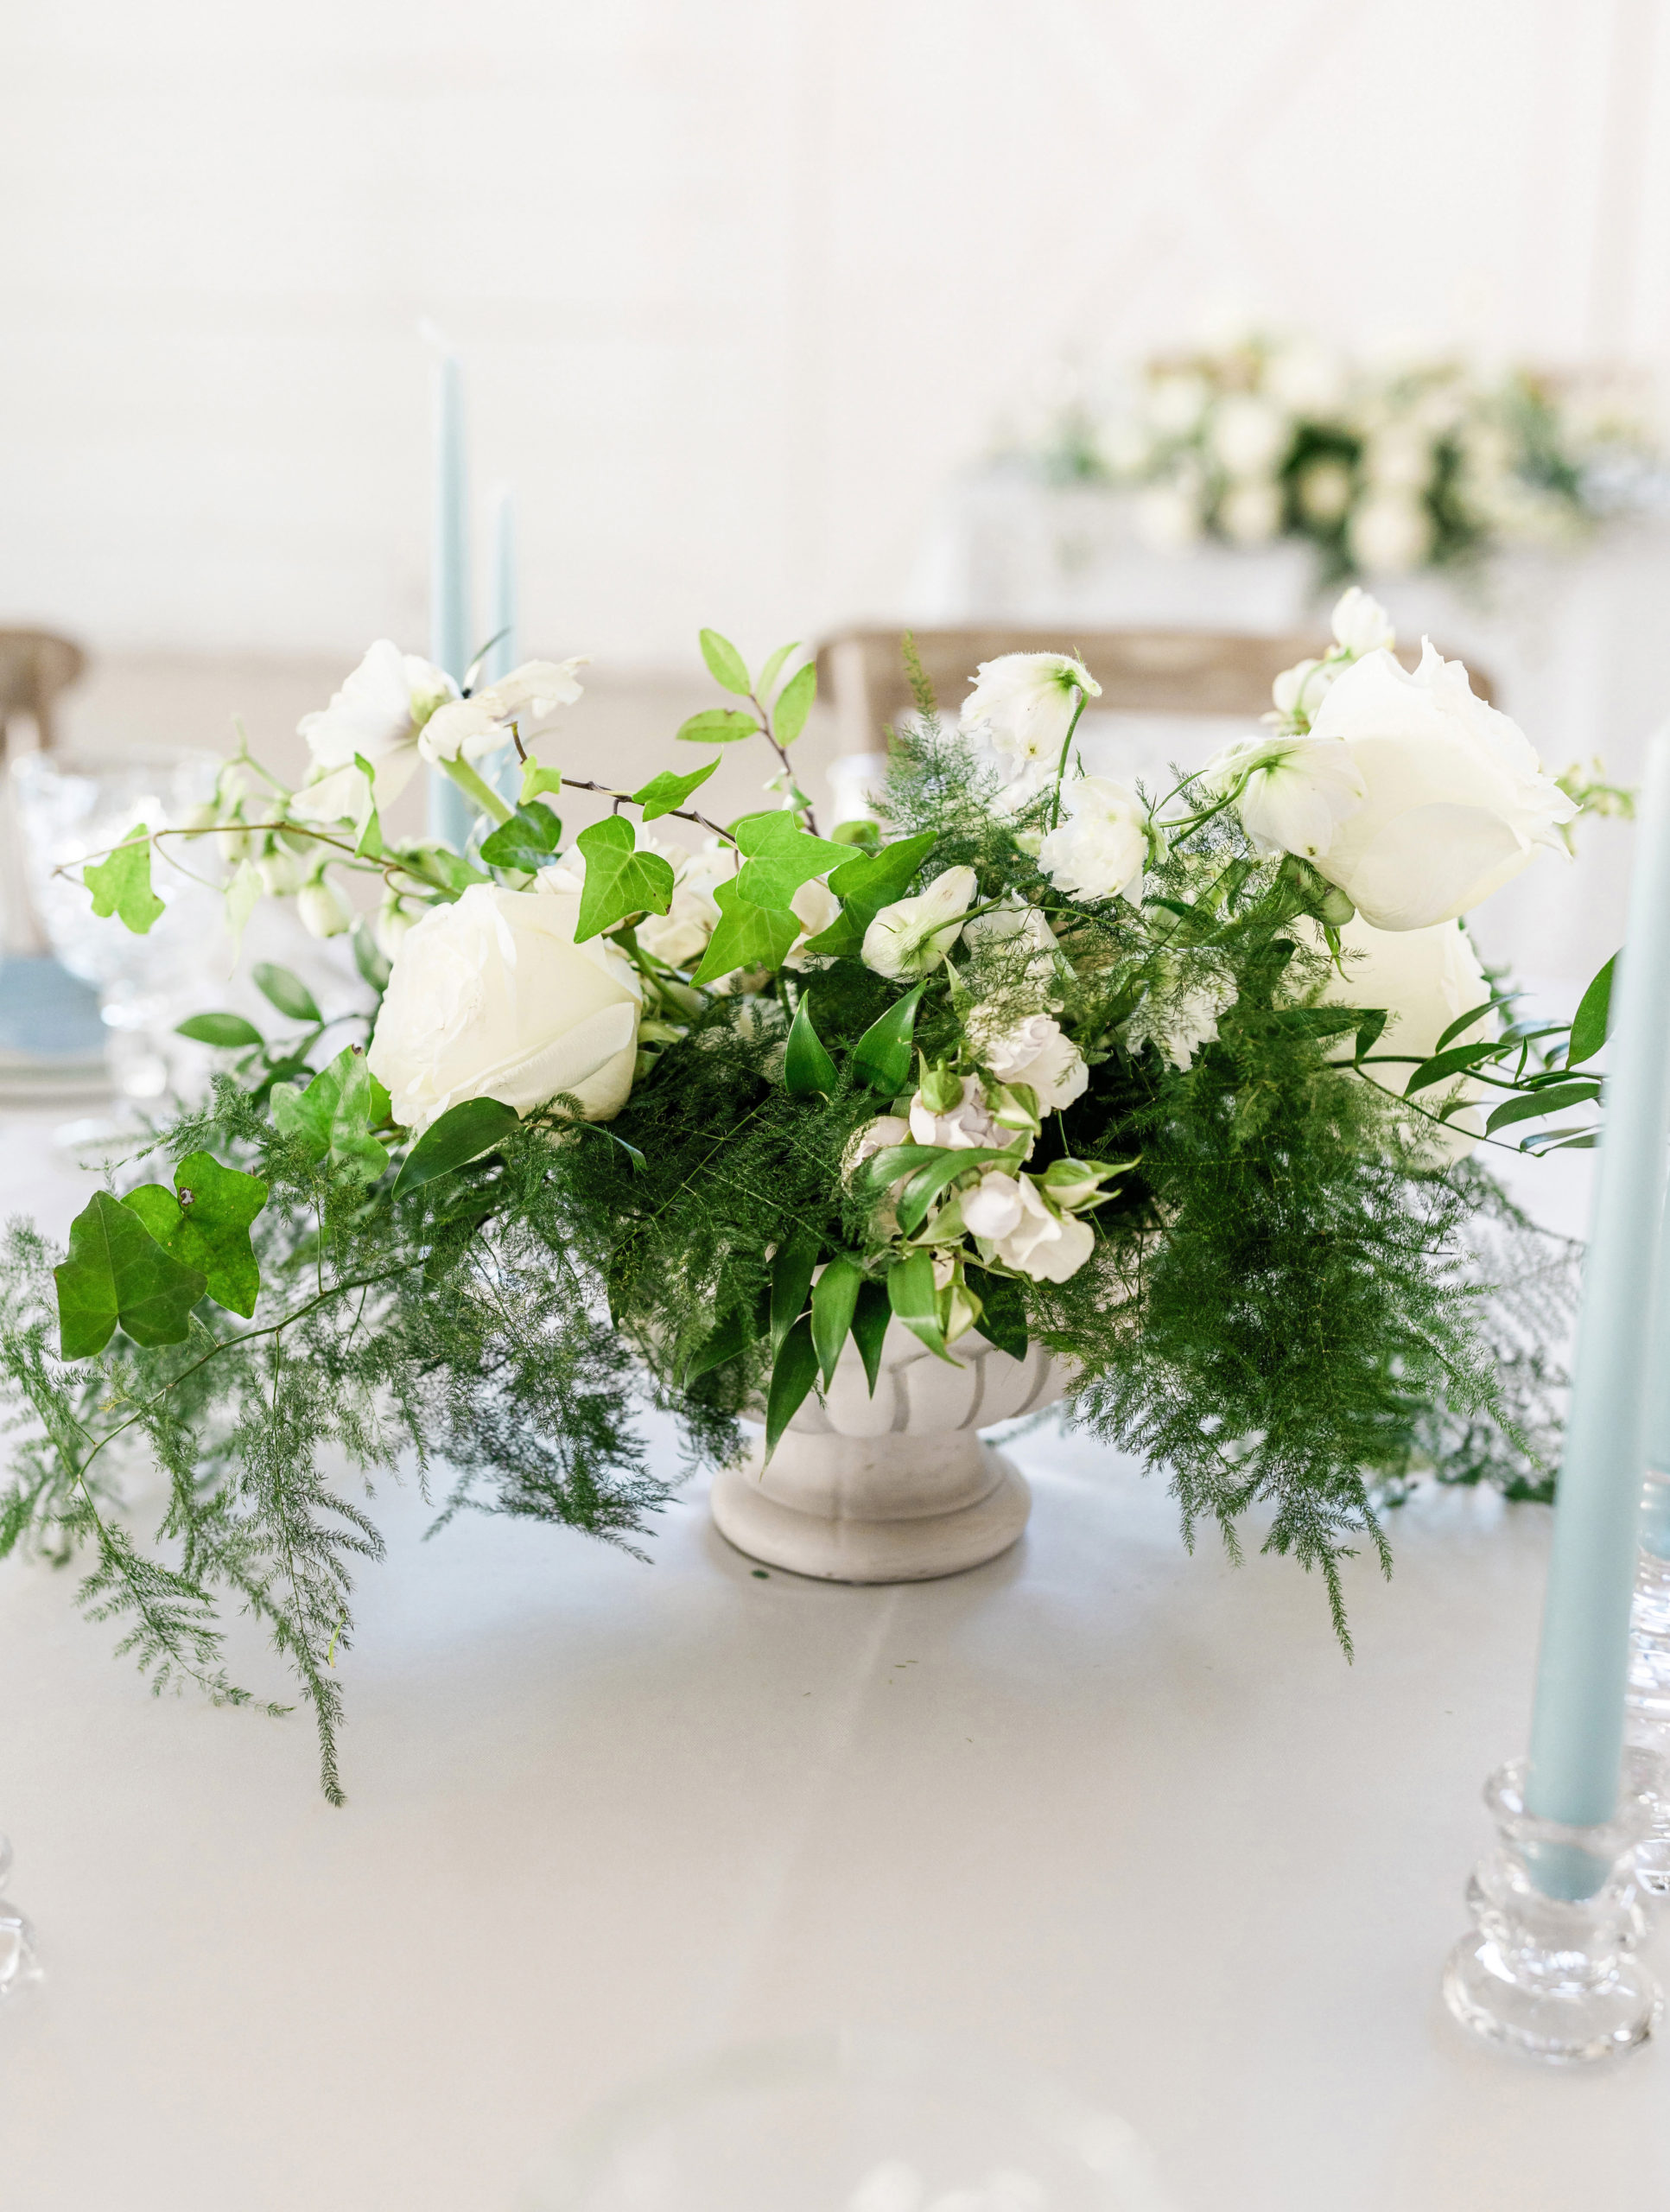 close-up shot of the beautiful white floral arrangement with light blue candles on the table, taken by Tatyana Zadorin Photography